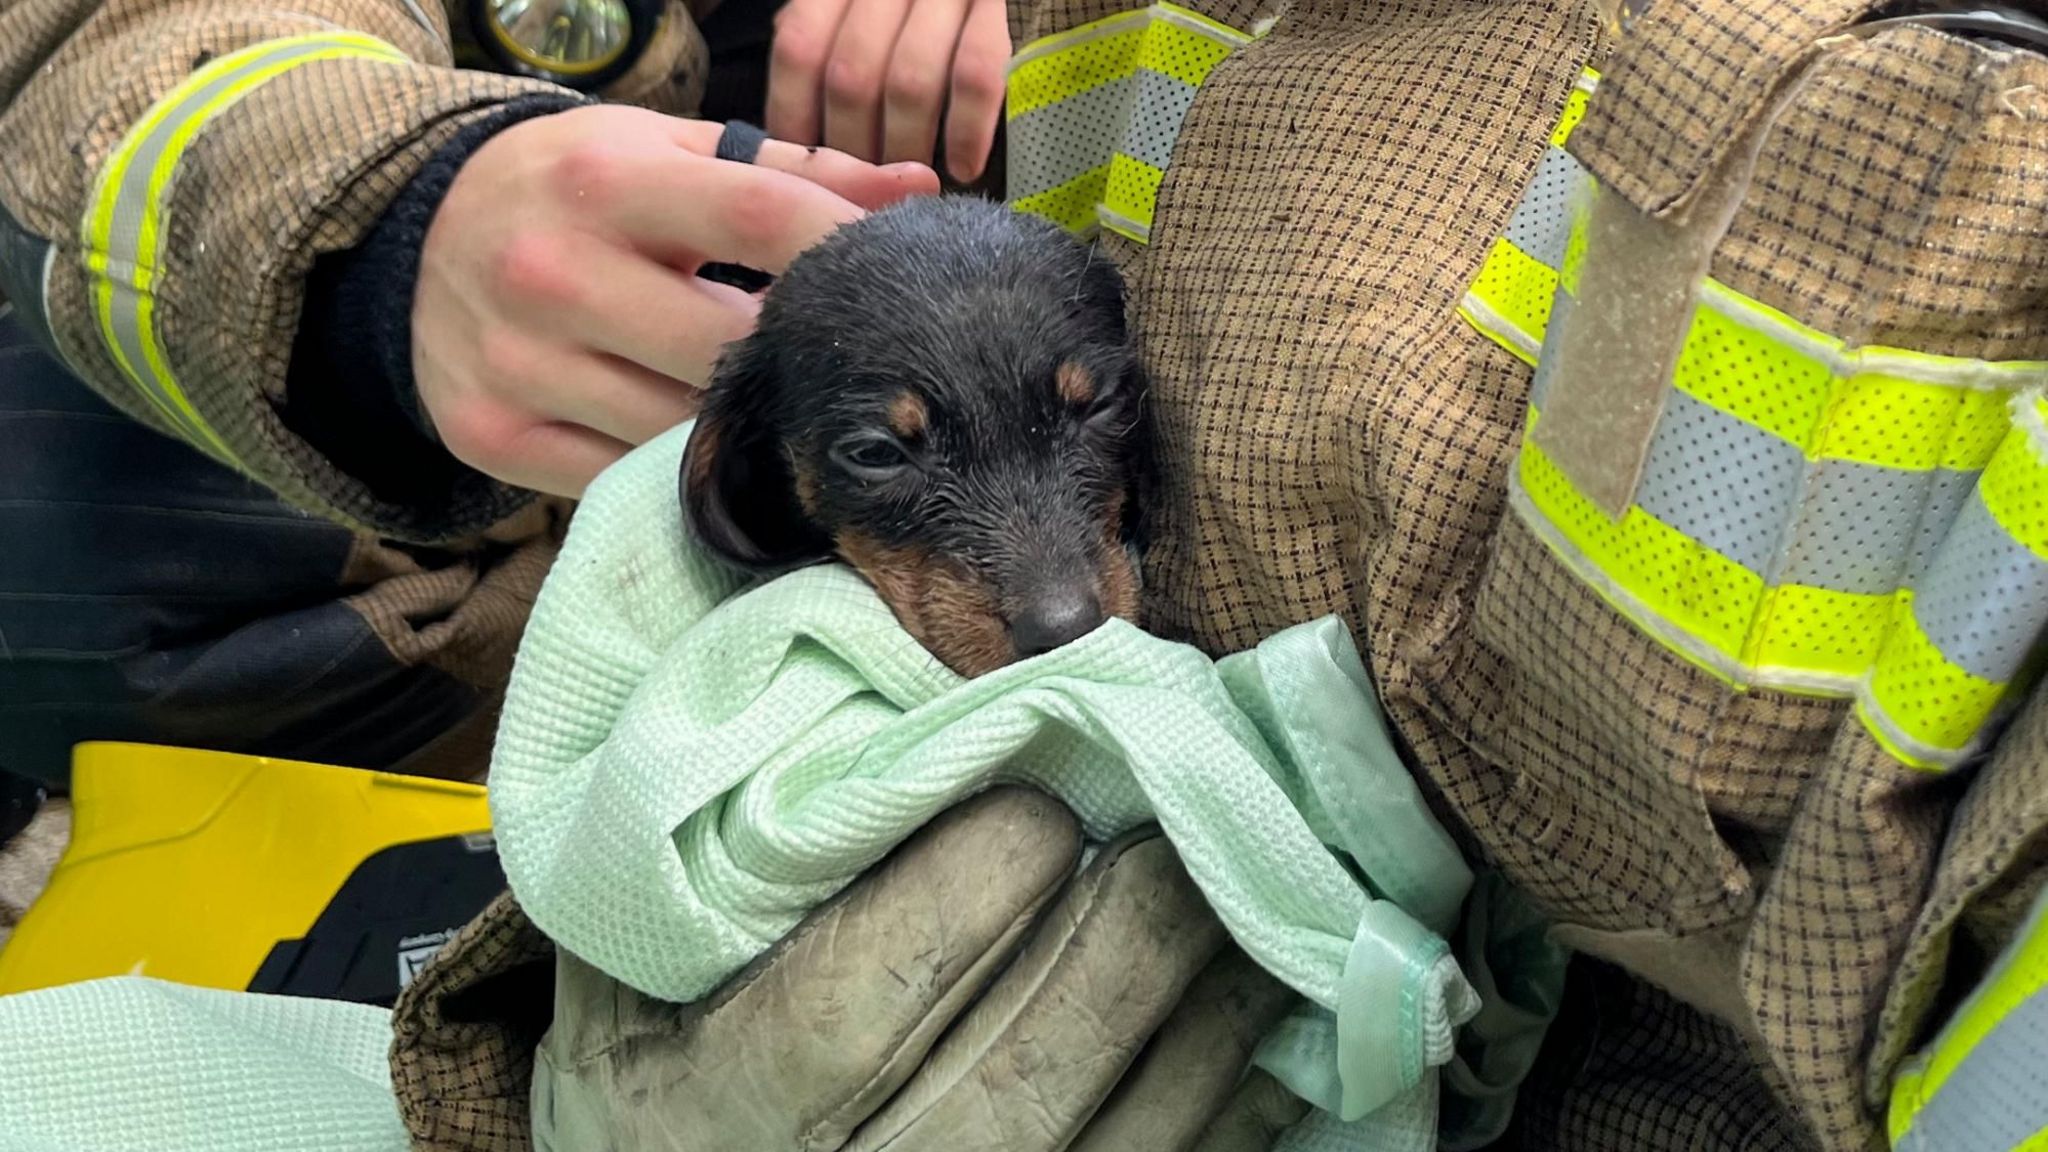 Puppy being held in the arms of a fireman